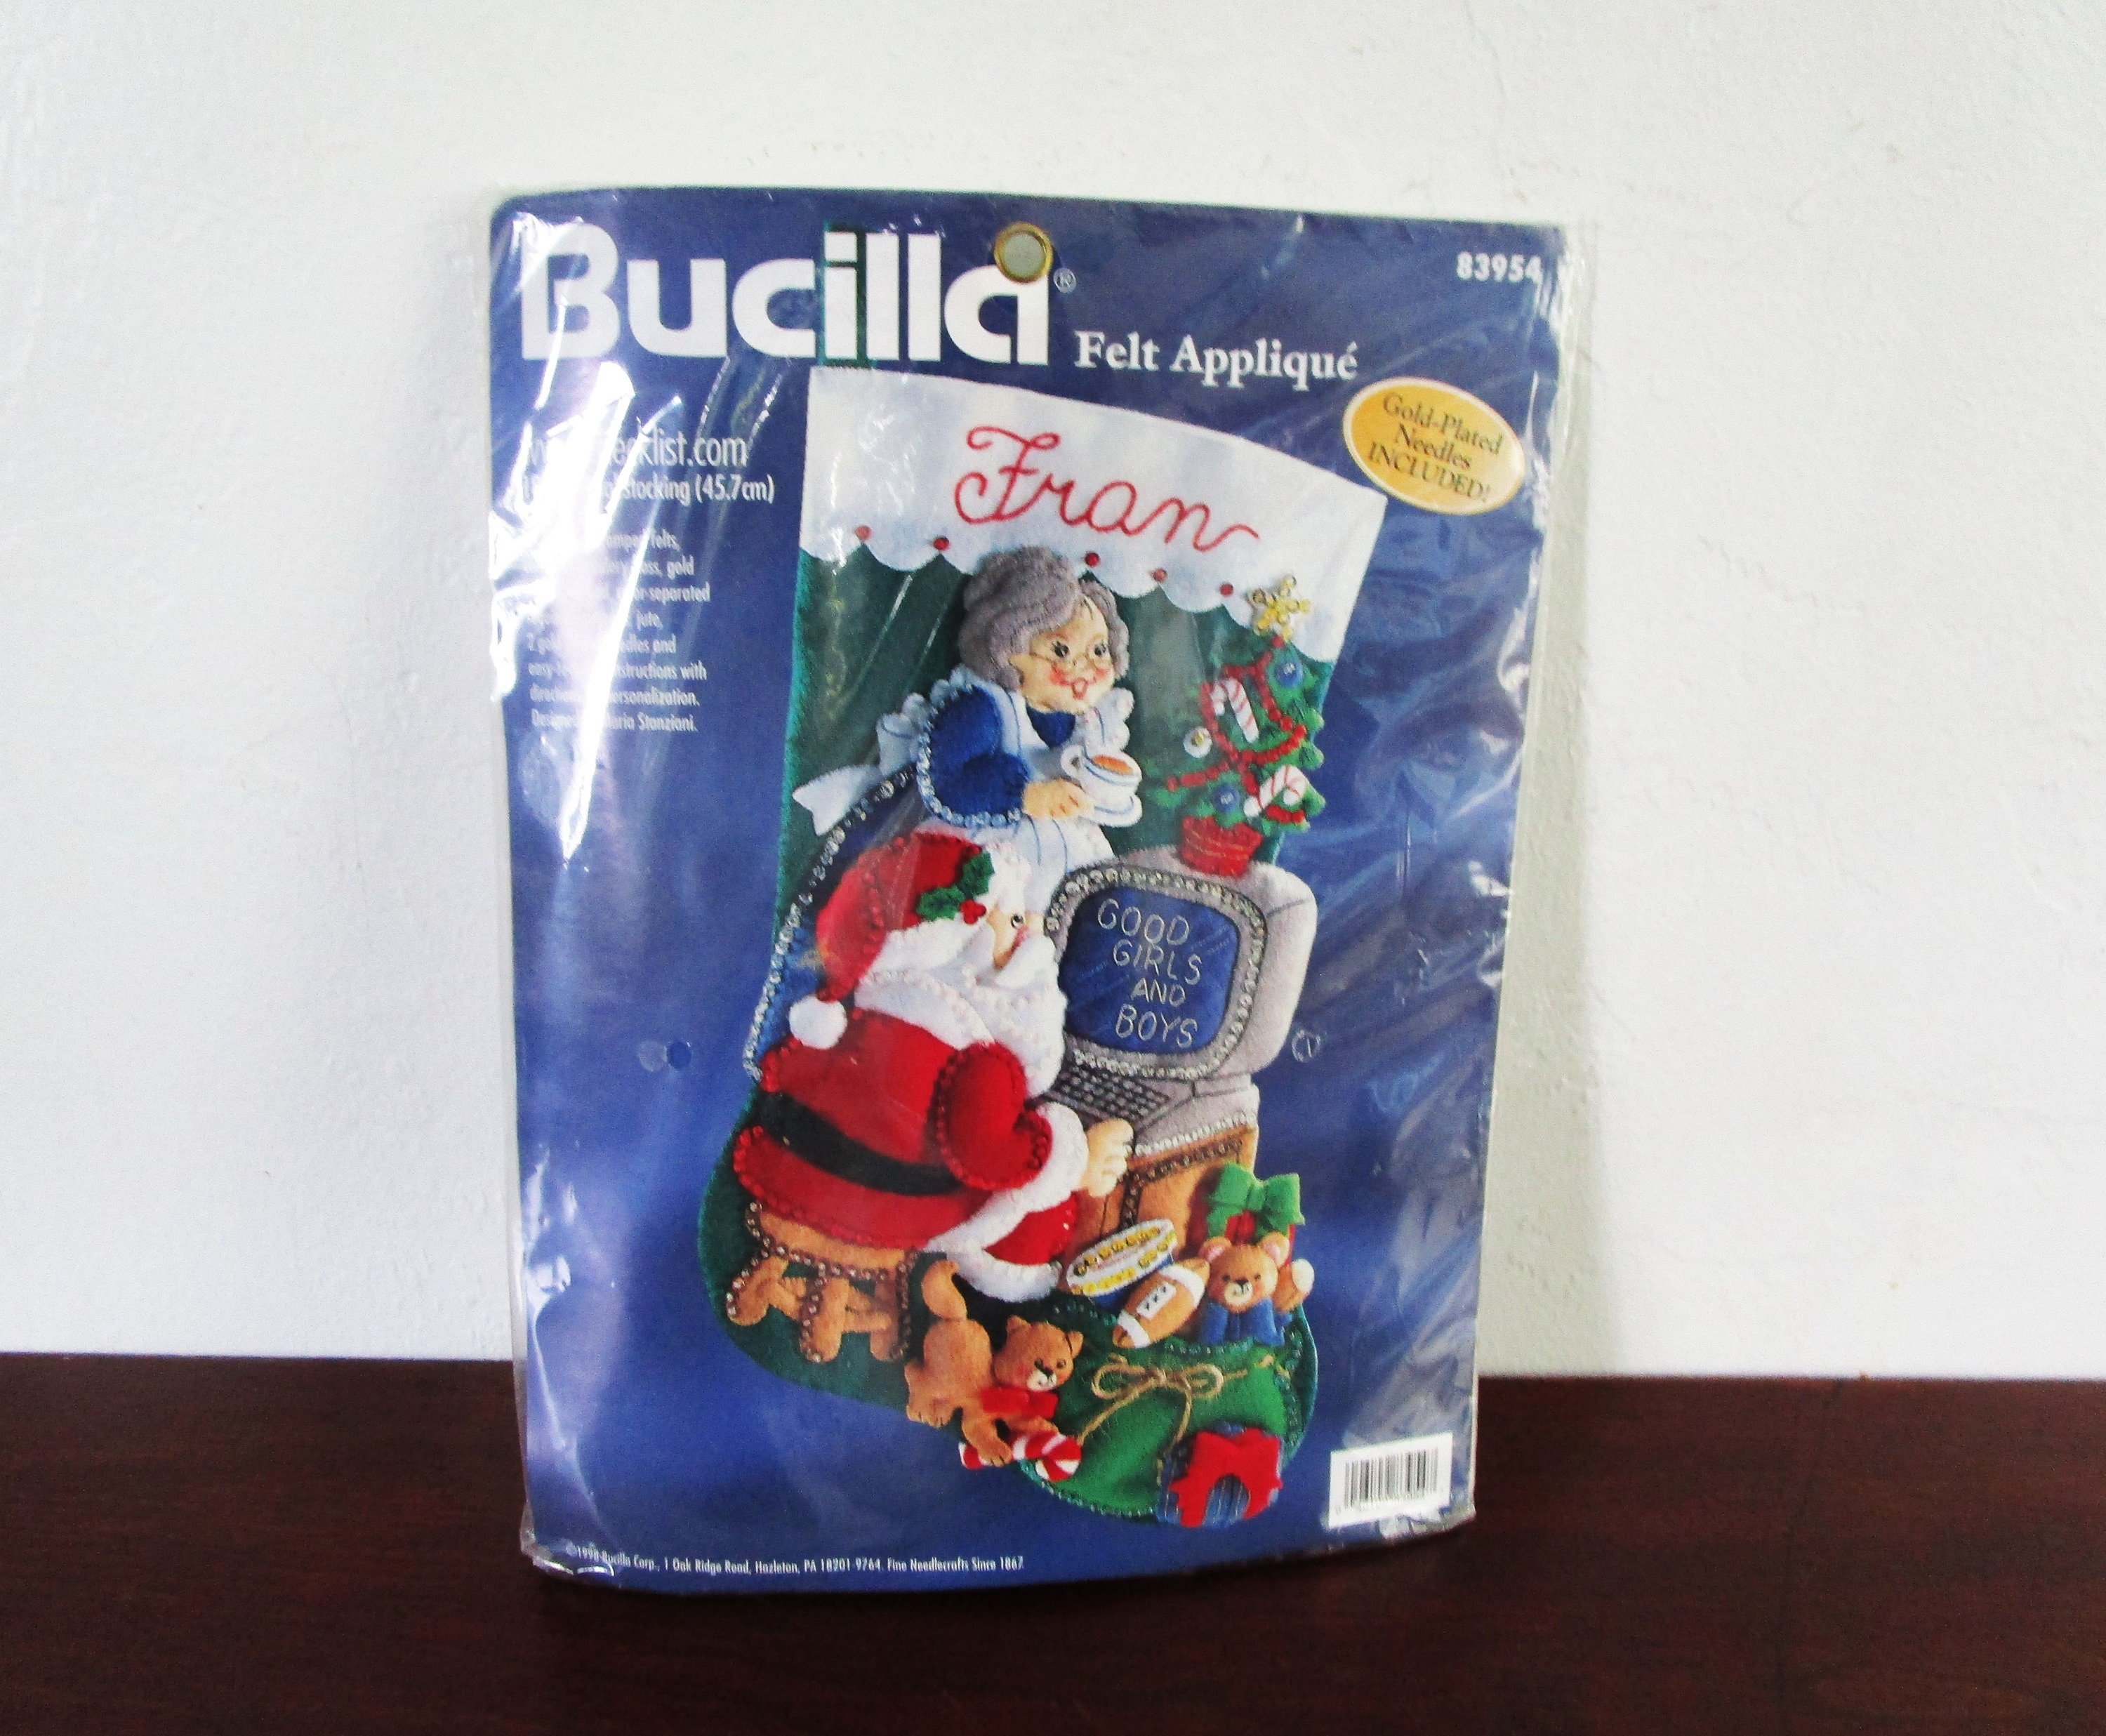 Plaid Bucilla Christmas choice felt stocking kits see pictures and  variations*